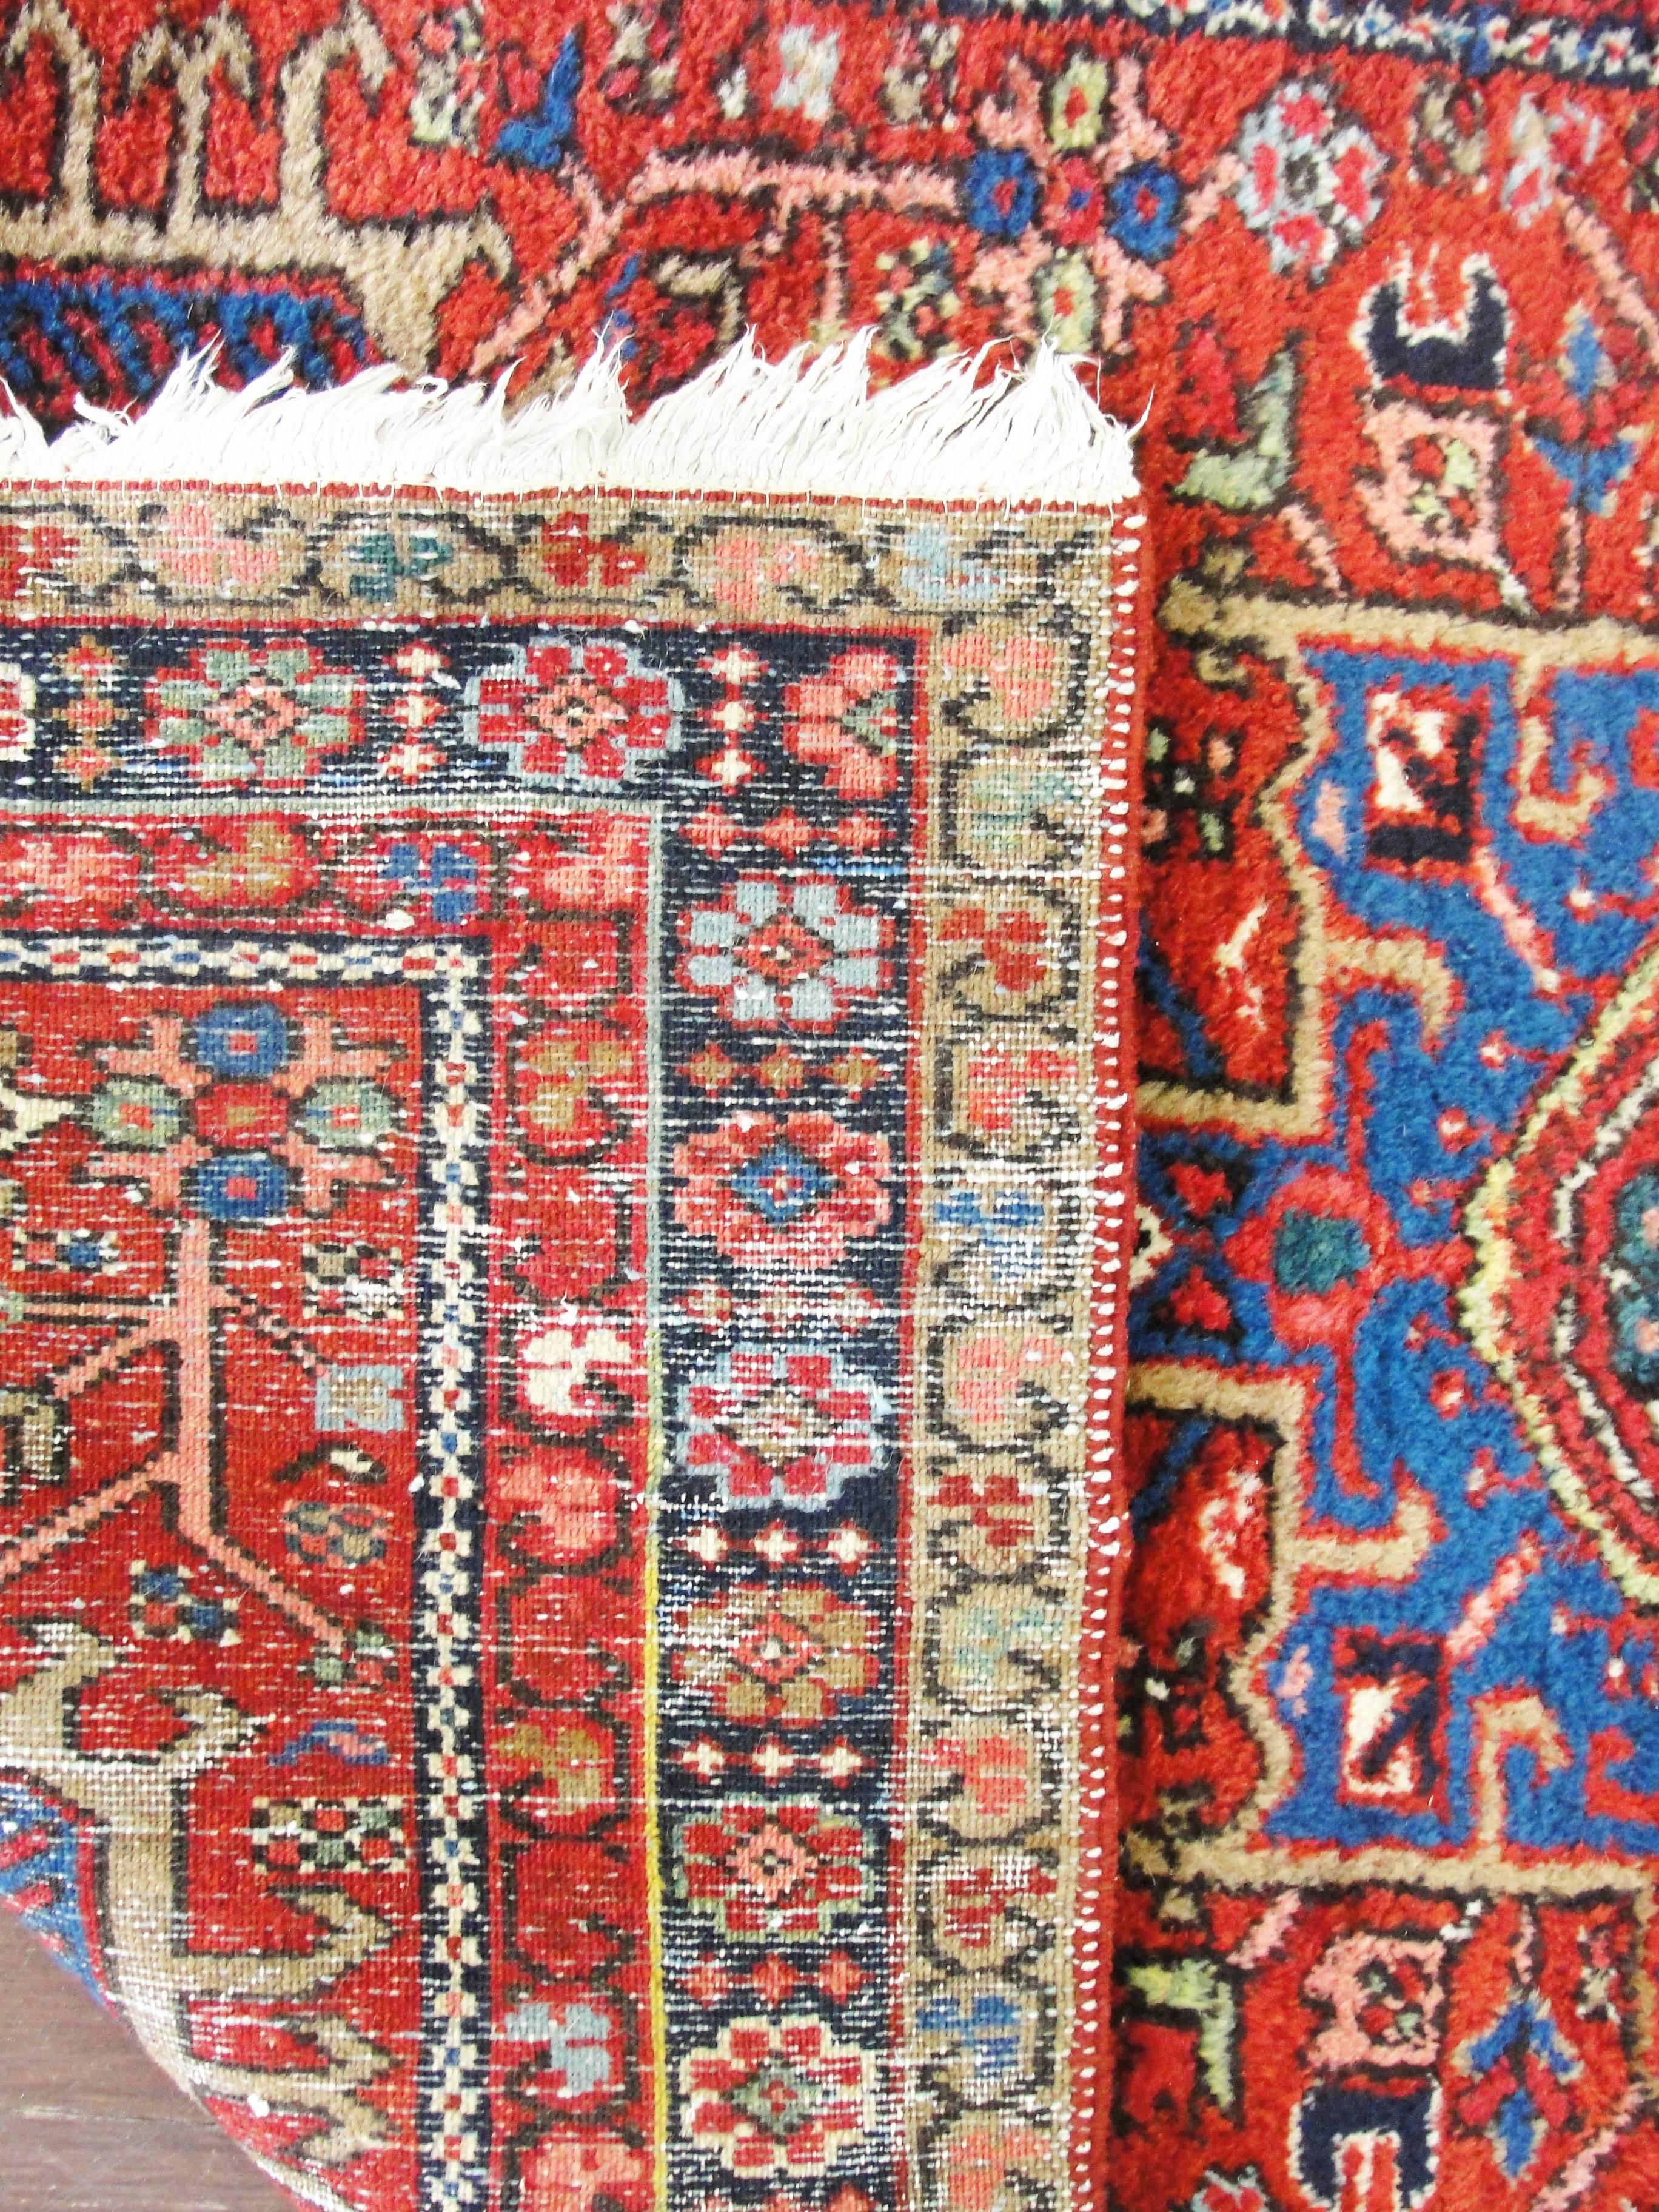 Excellent condition and great colors, circa 1930.
Karajah, Heriz, Serapi, Bakshaish. Karaja and Serapi or Bakshaish all are villages in the district of Heriz north west Persia. Since mid-19th century rugs from these area imported to US and European